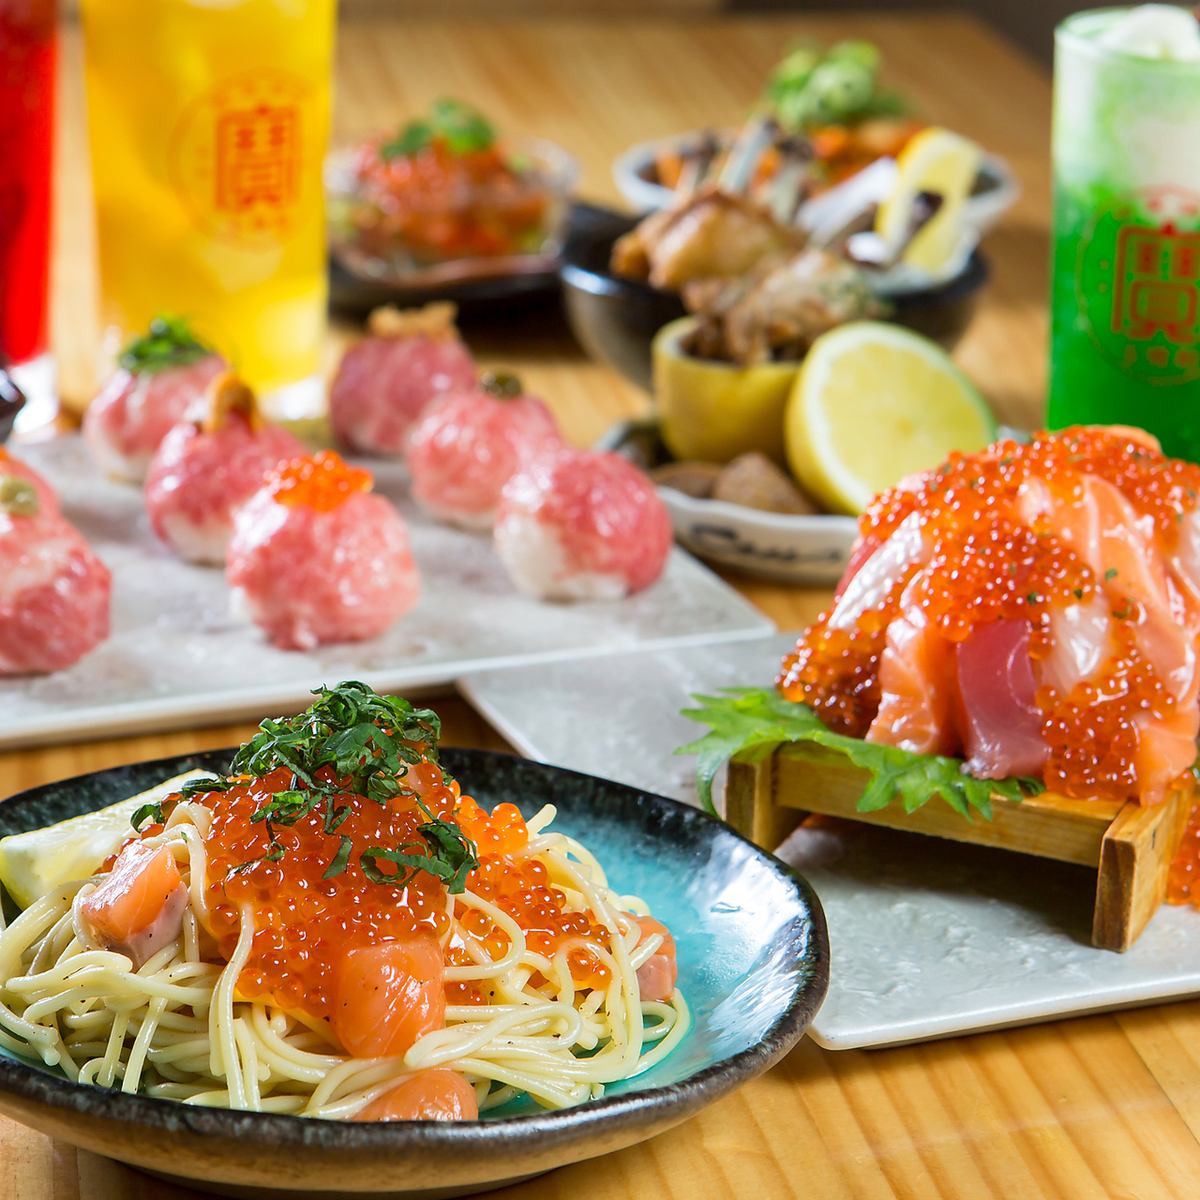 [Lots of SNS-worthy menus♪] Popular meat sushi and many photogenic menus